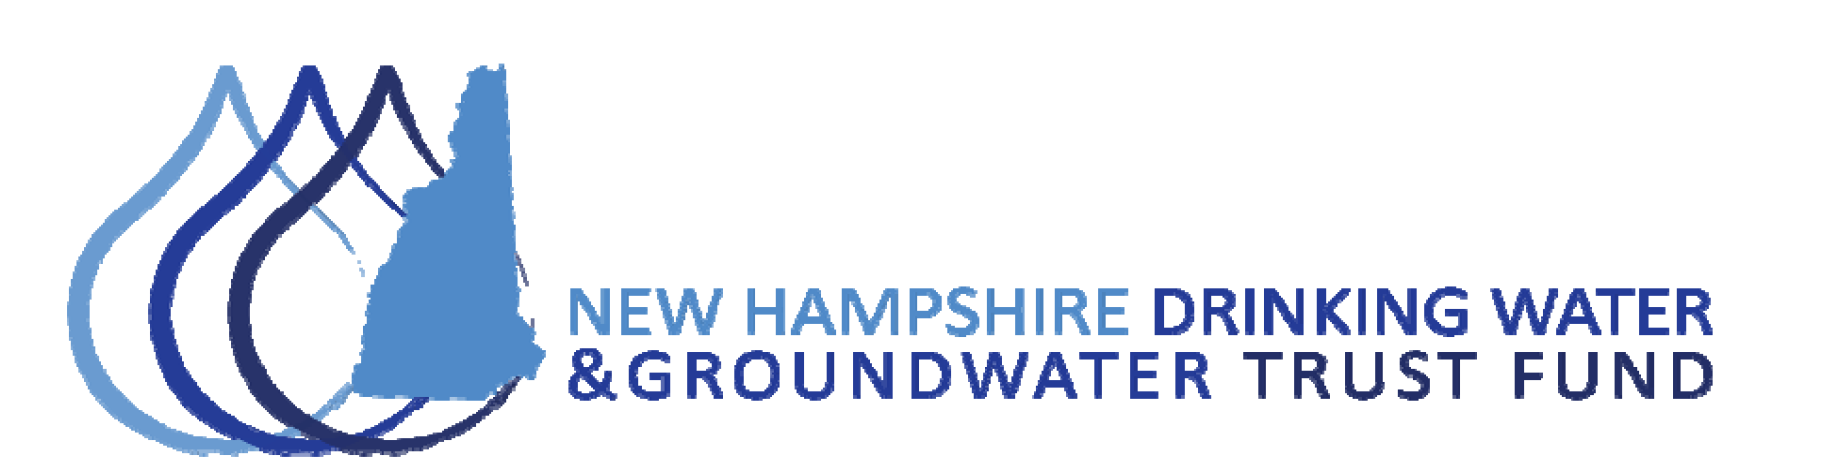 New Hampshire Drinking Water and Groundwater Trust Fund – A new pot of money for drinking water suppliers